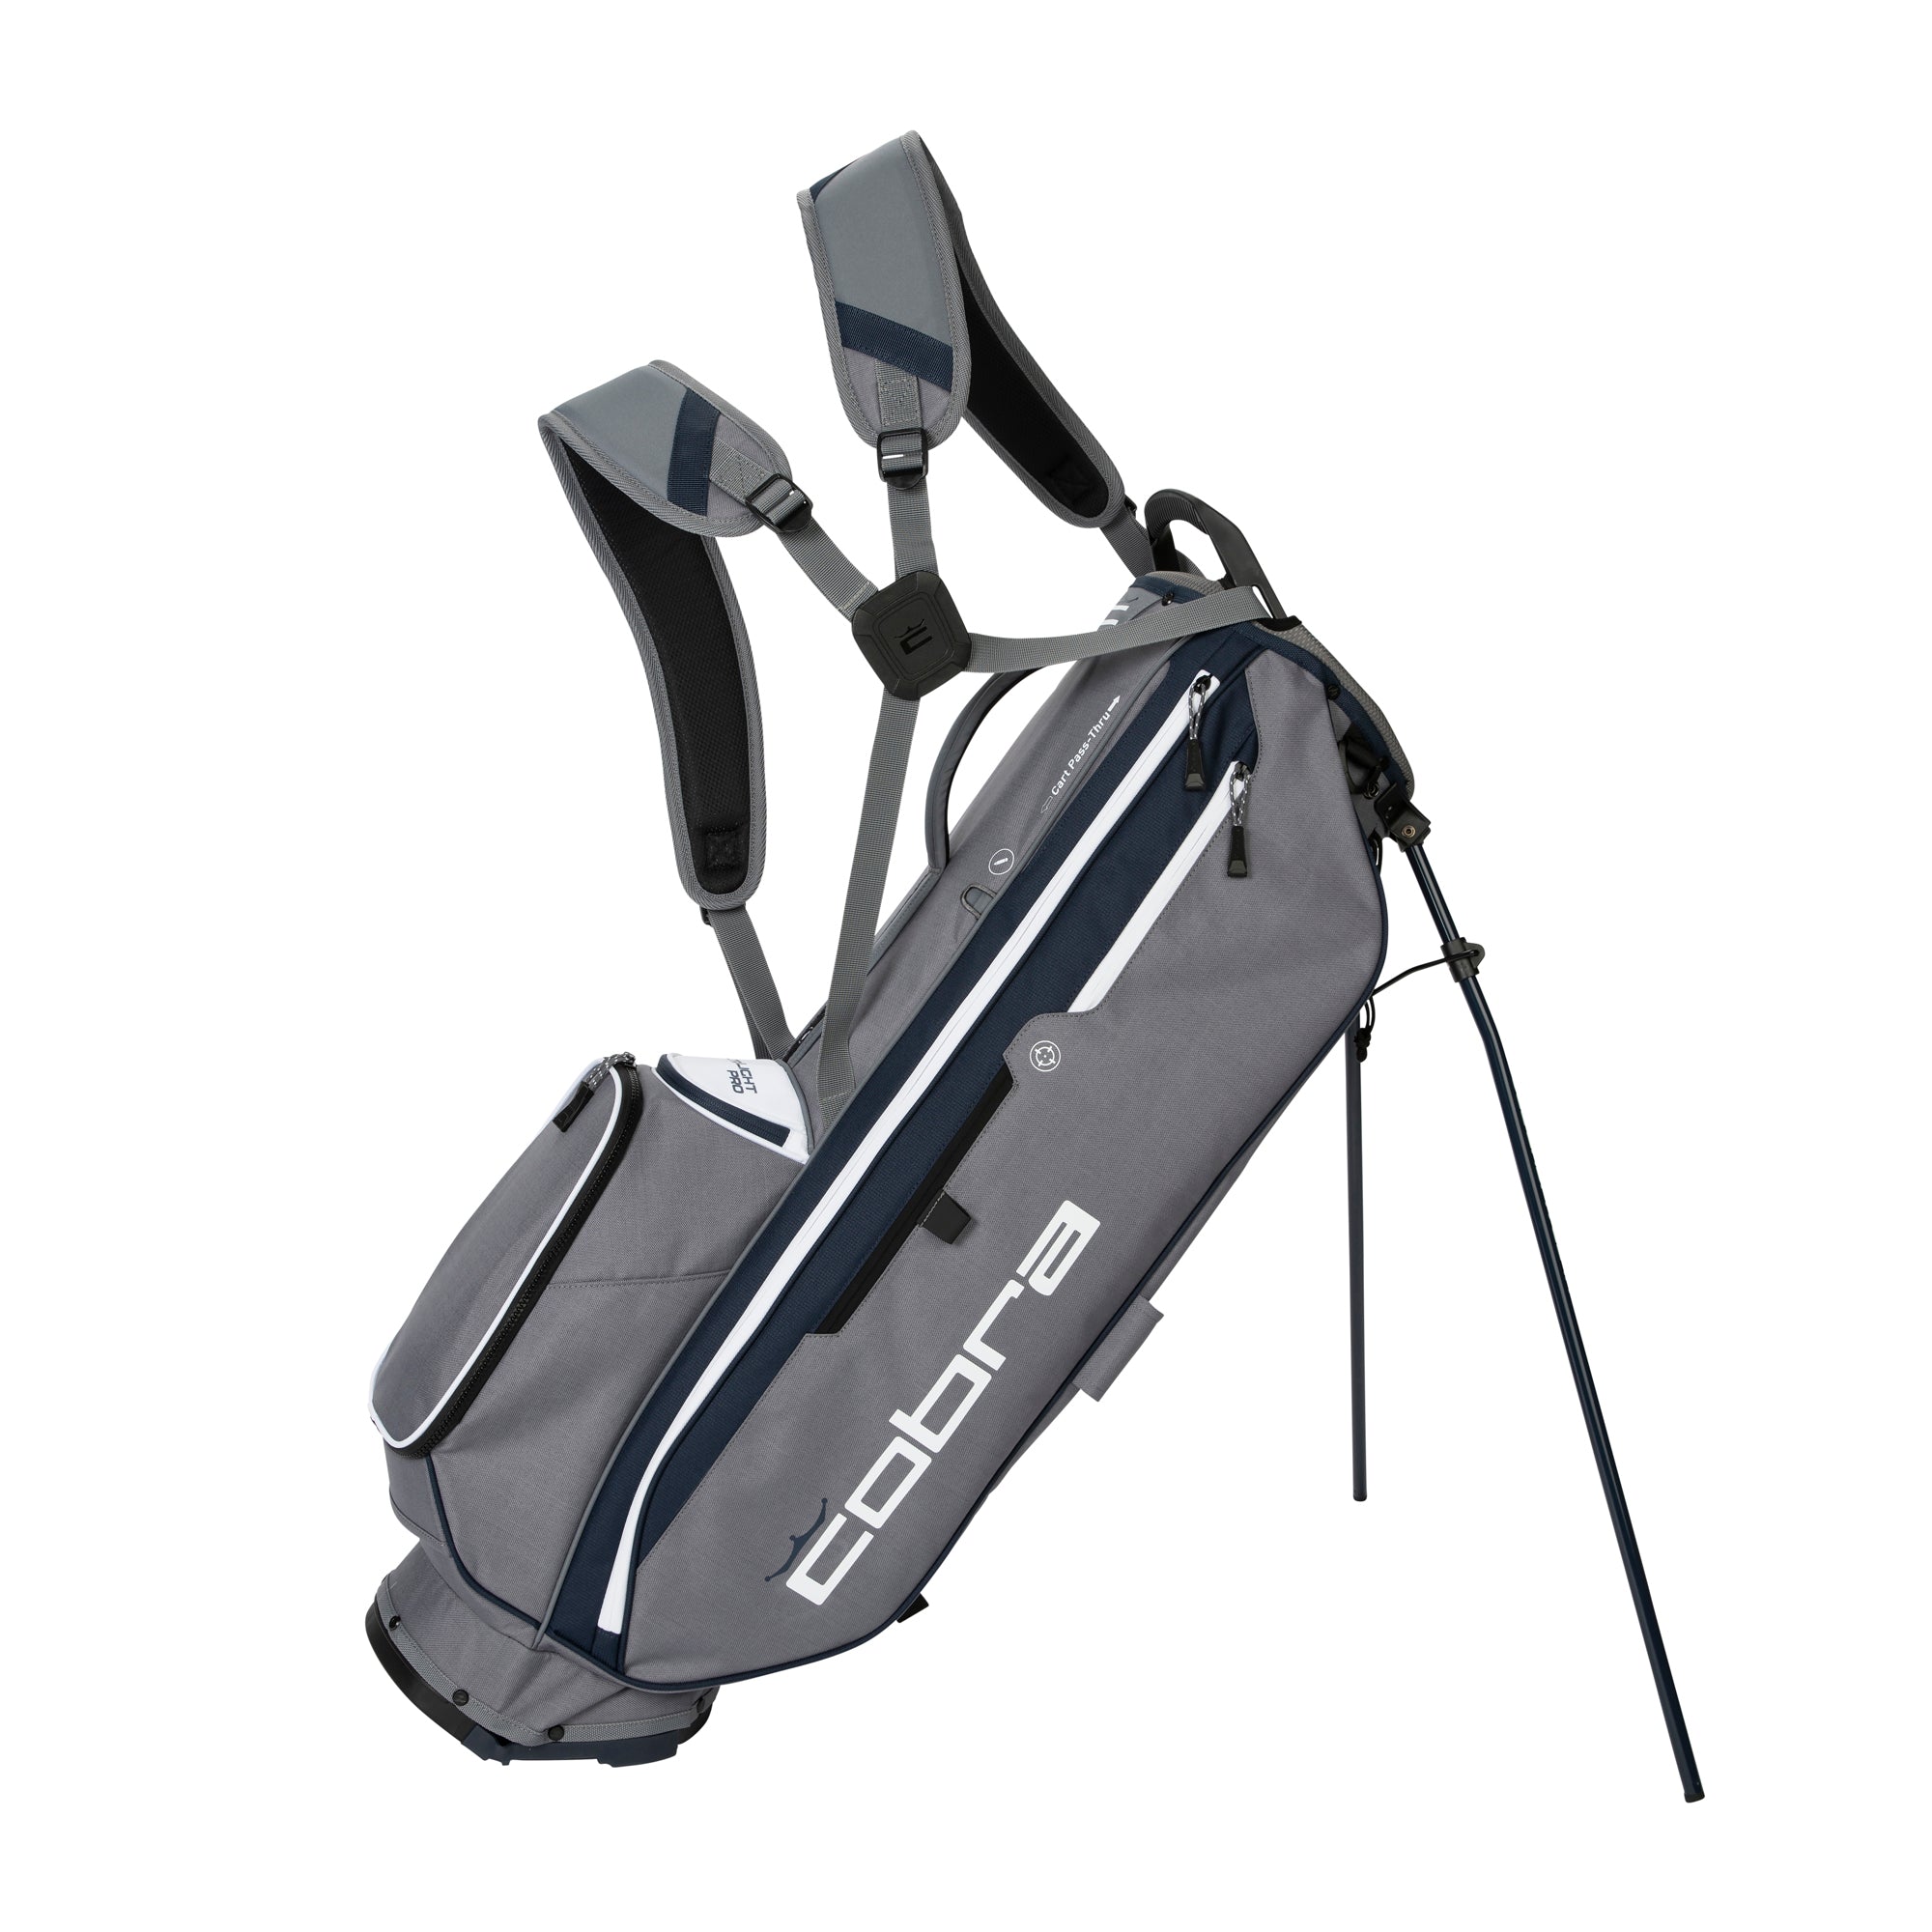 Best lightweight golf bags Best performing most stylish bags for golfers